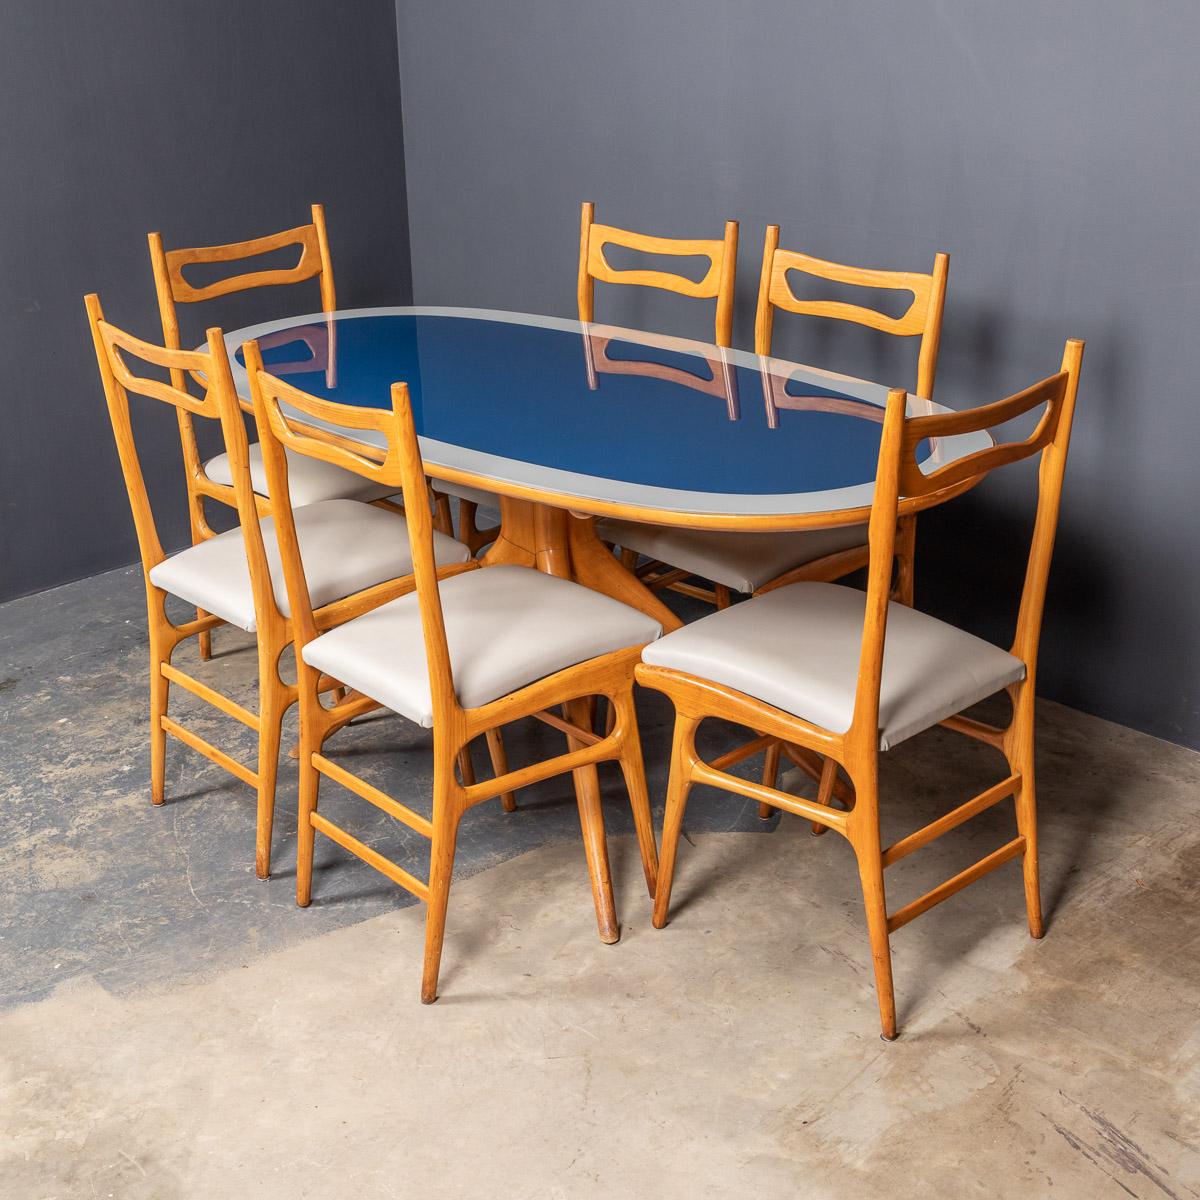 Modern 20th Century Italian beech table on a spreading four leg pedestal accompanied by a set of six complimentary chairs made of lacquered light wood, leather covered seats and glass covered table top, presented at the Brussels exposition